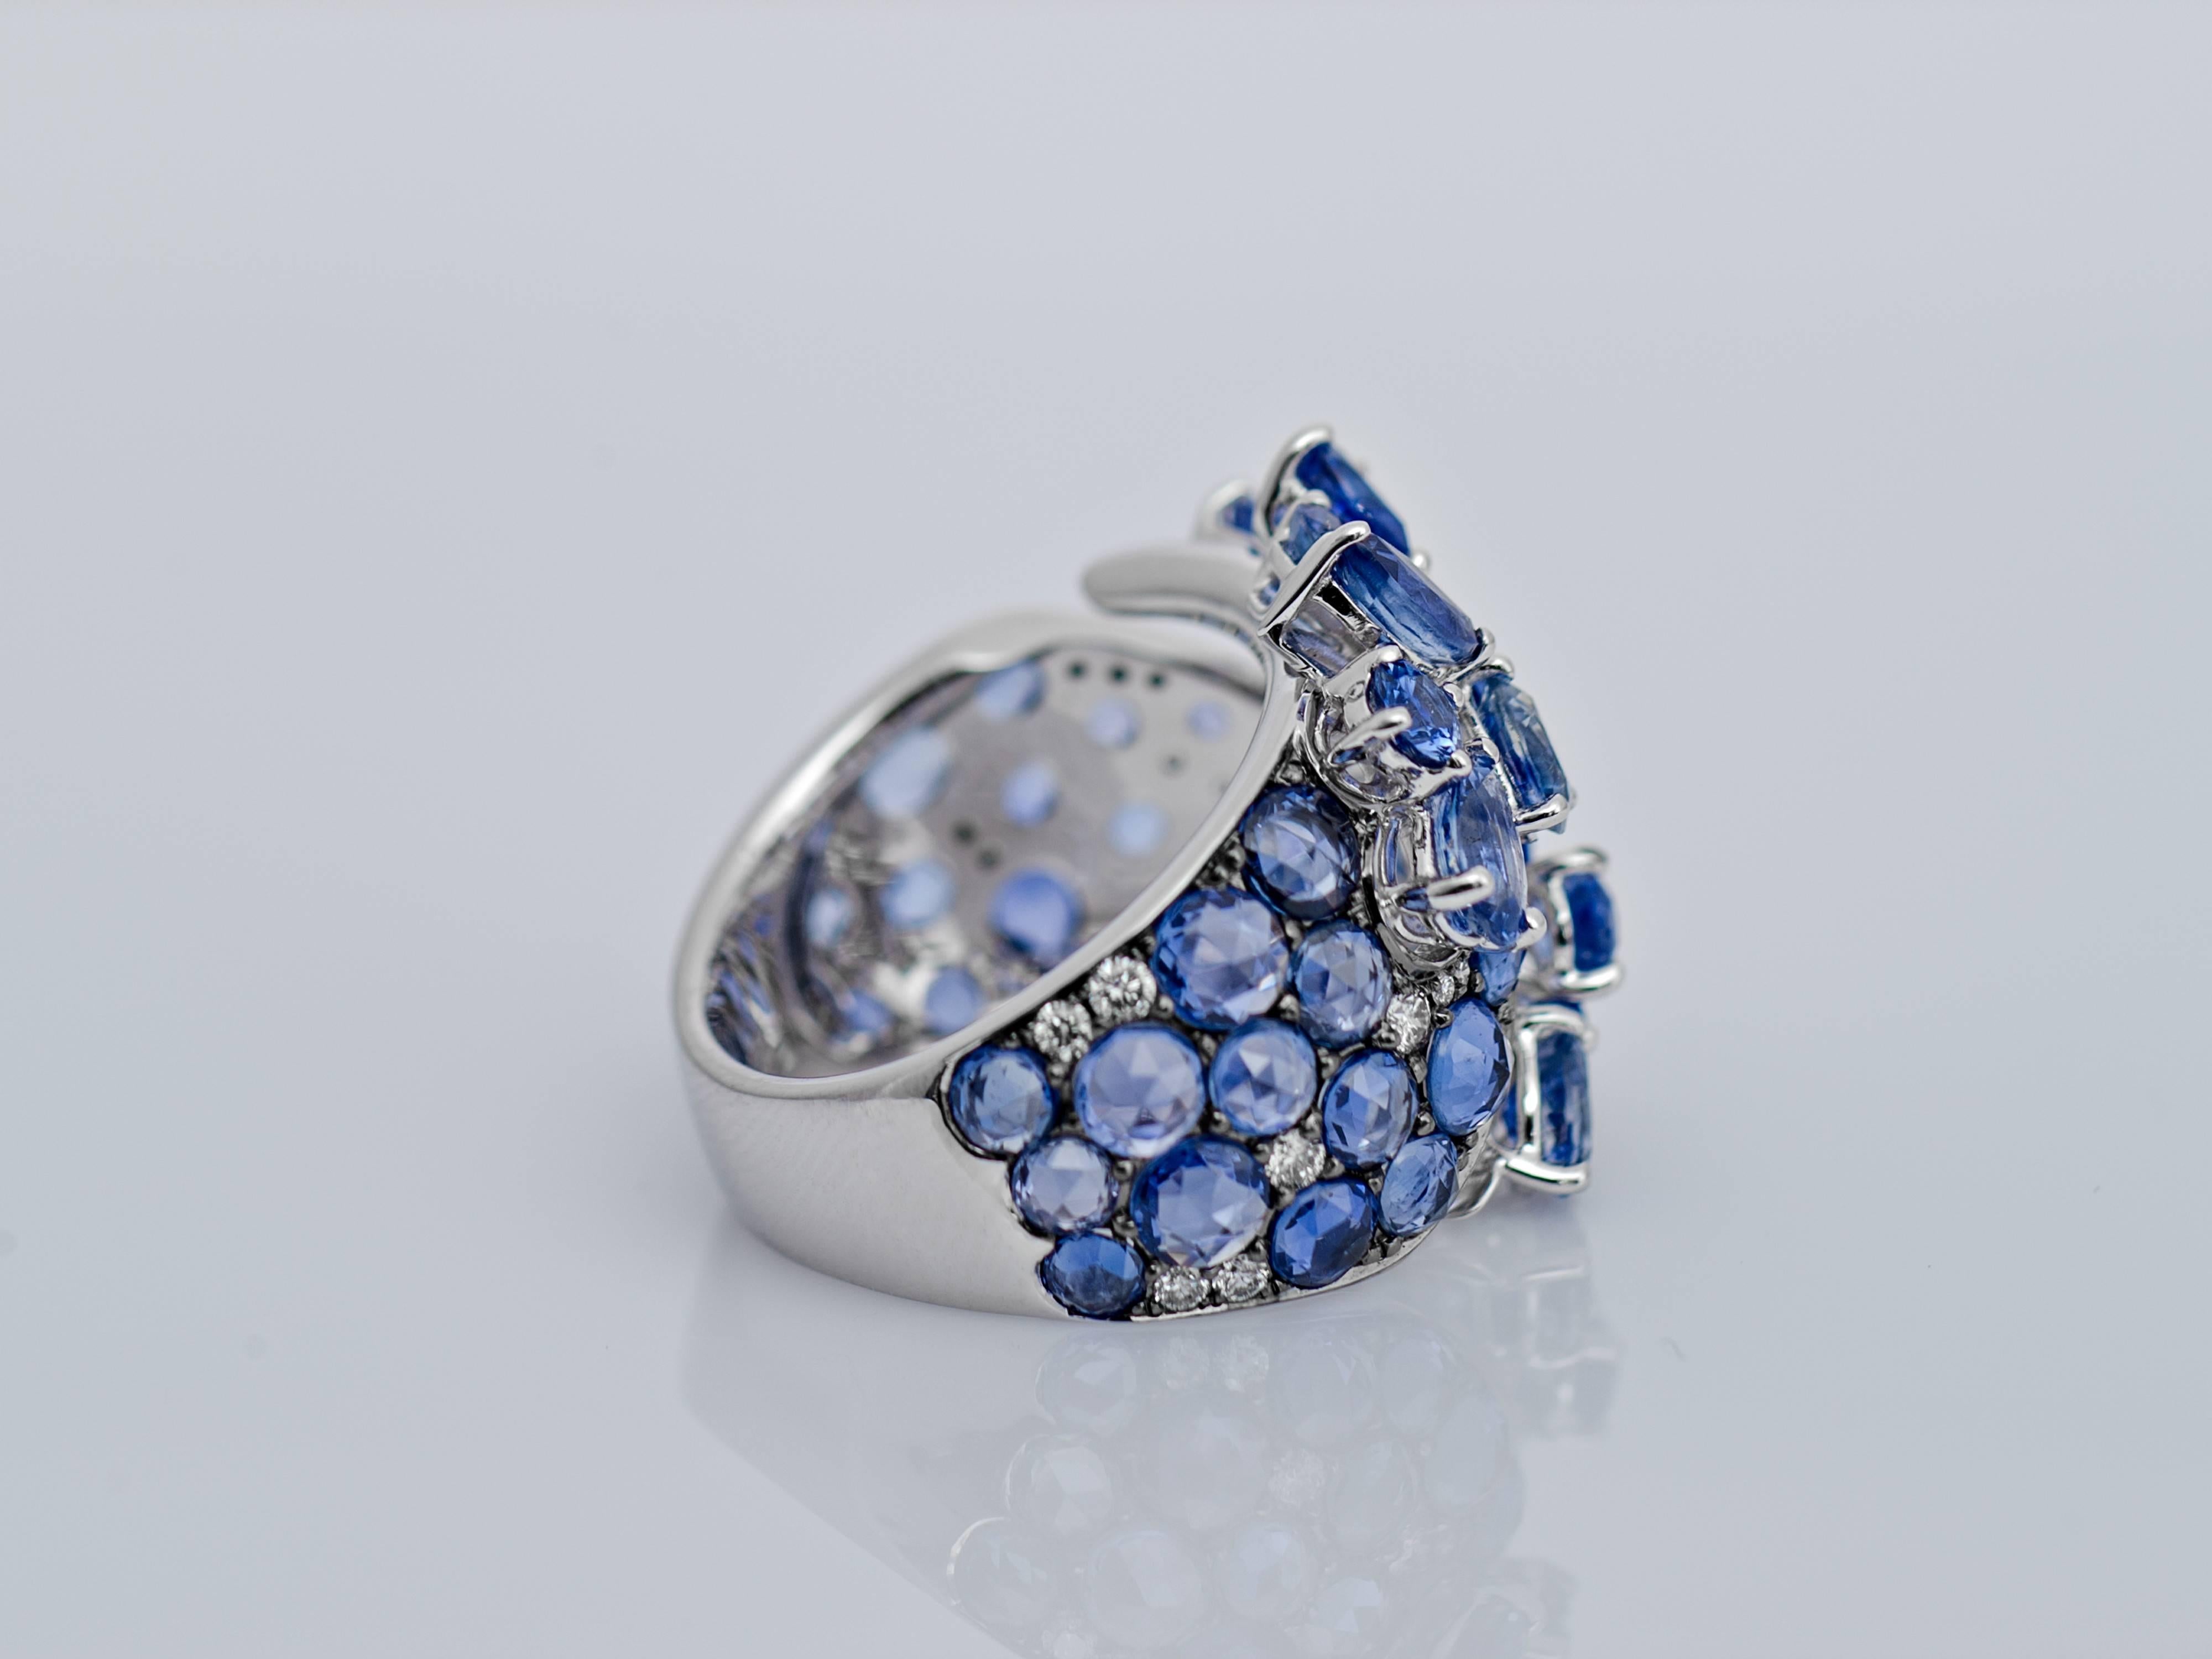 Designed as a stylised pair of flowers on top of a twisted ring leaving an intentional gap in the centre of the piece. Each flower head of cluster design set with pear and marquise shaped blue sapphires surrounded by more round sapphires and